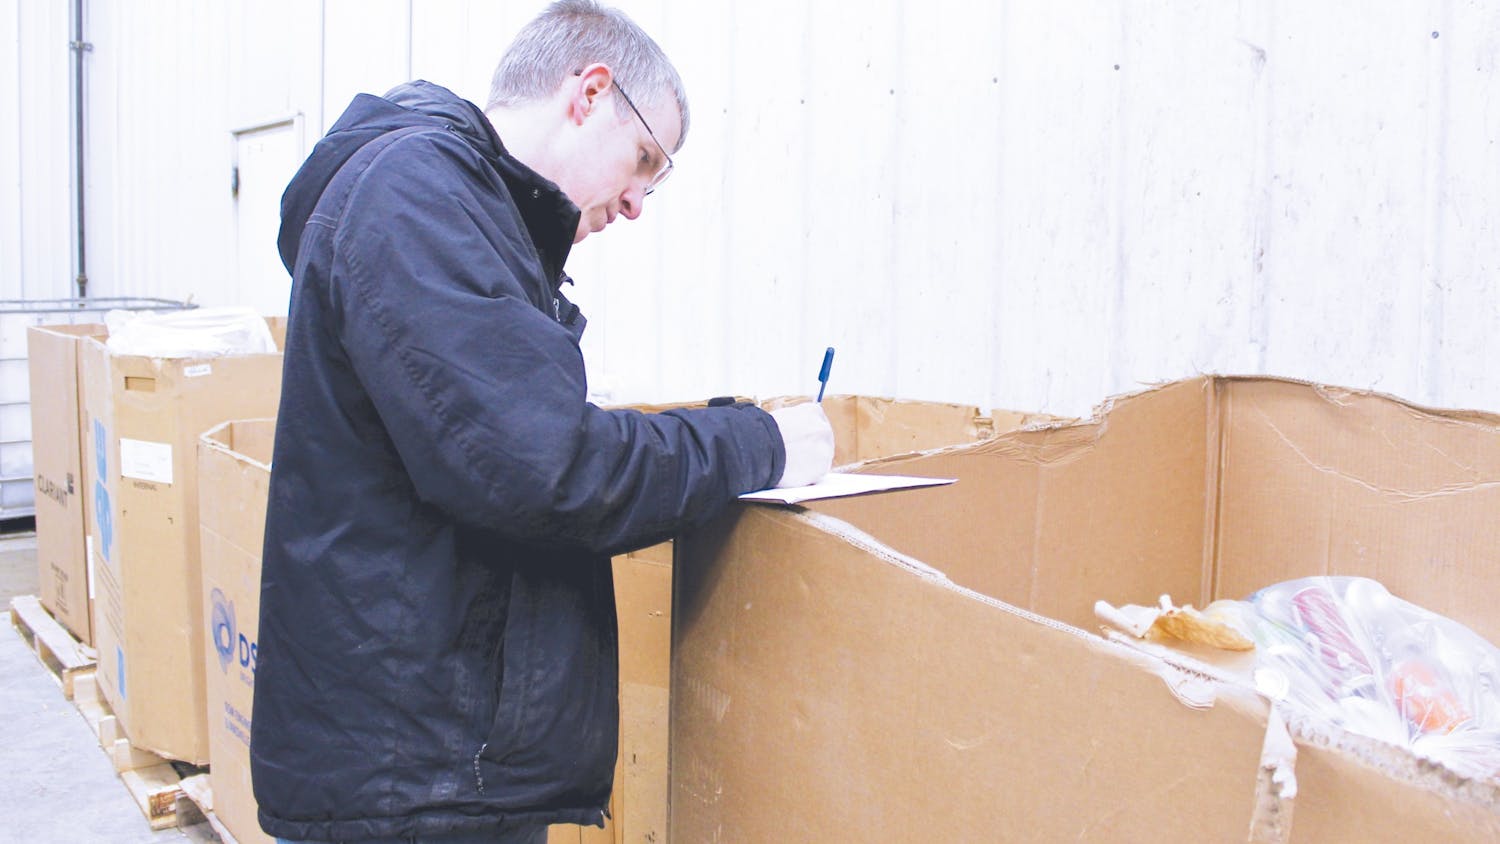 Phil Grabowski collects weekly data on recycling PRINT_.jpg